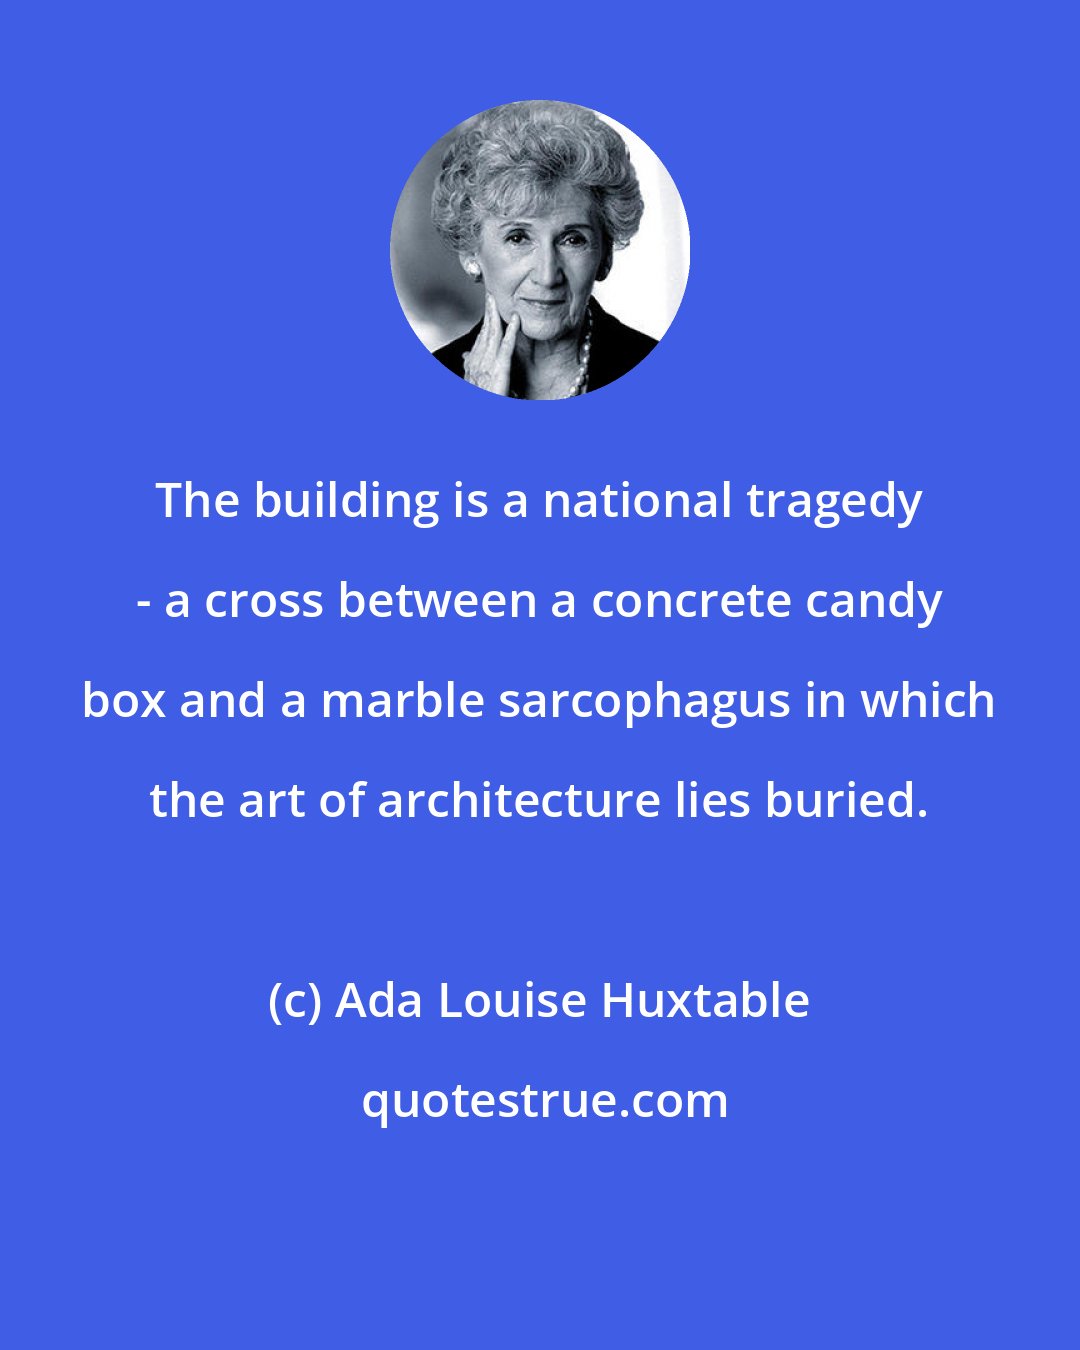 Ada Louise Huxtable: The building is a national tragedy - a cross between a concrete candy box and a marble sarcophagus in which the art of architecture lies buried.